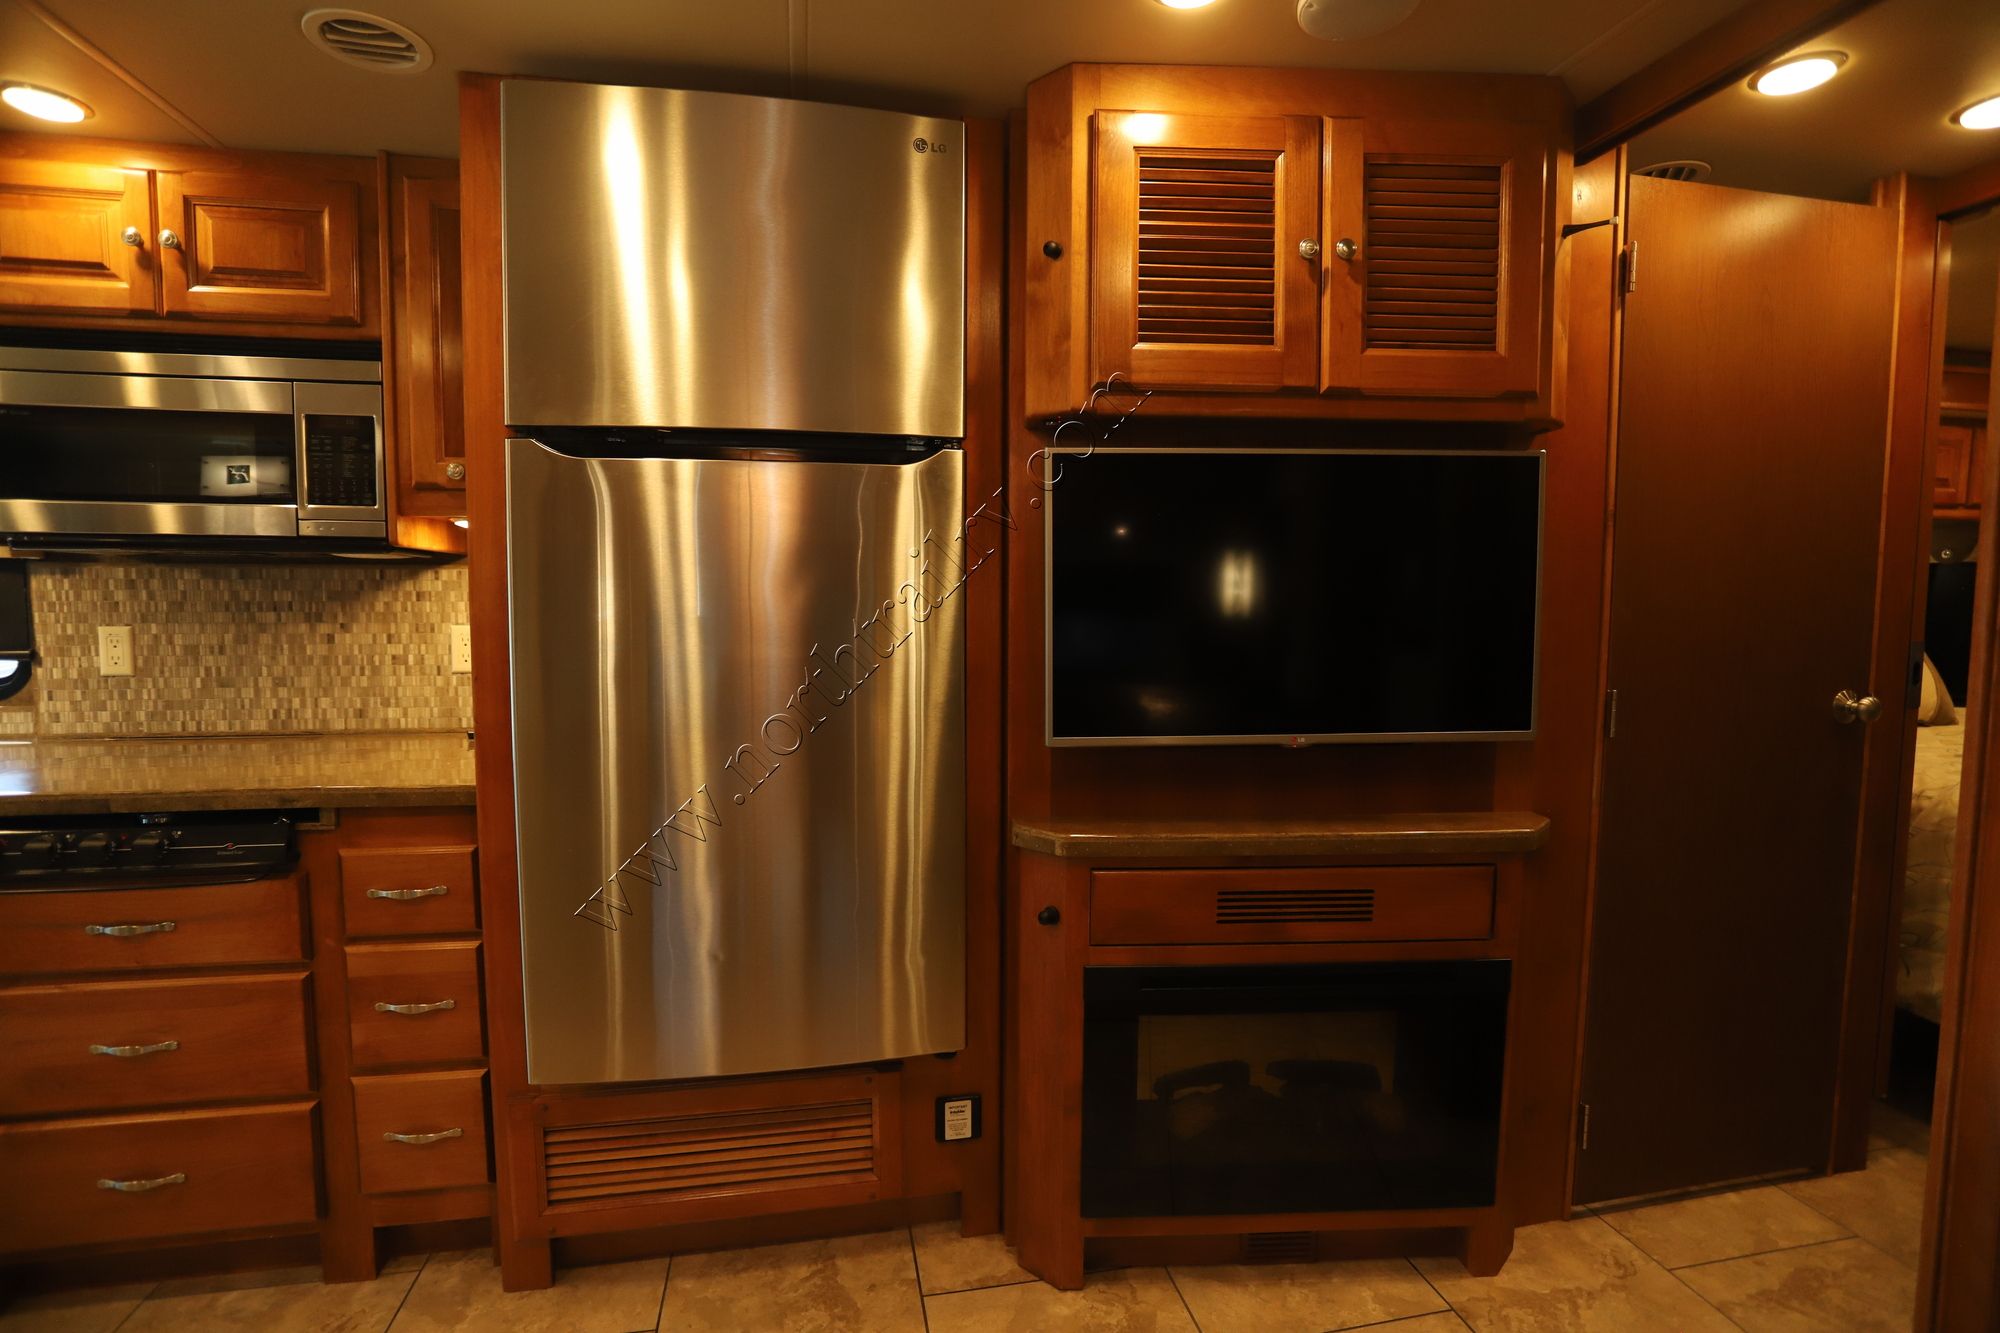 Used 2015 Tiffin Motor Homes Allegro 32SA Class A  For Sale